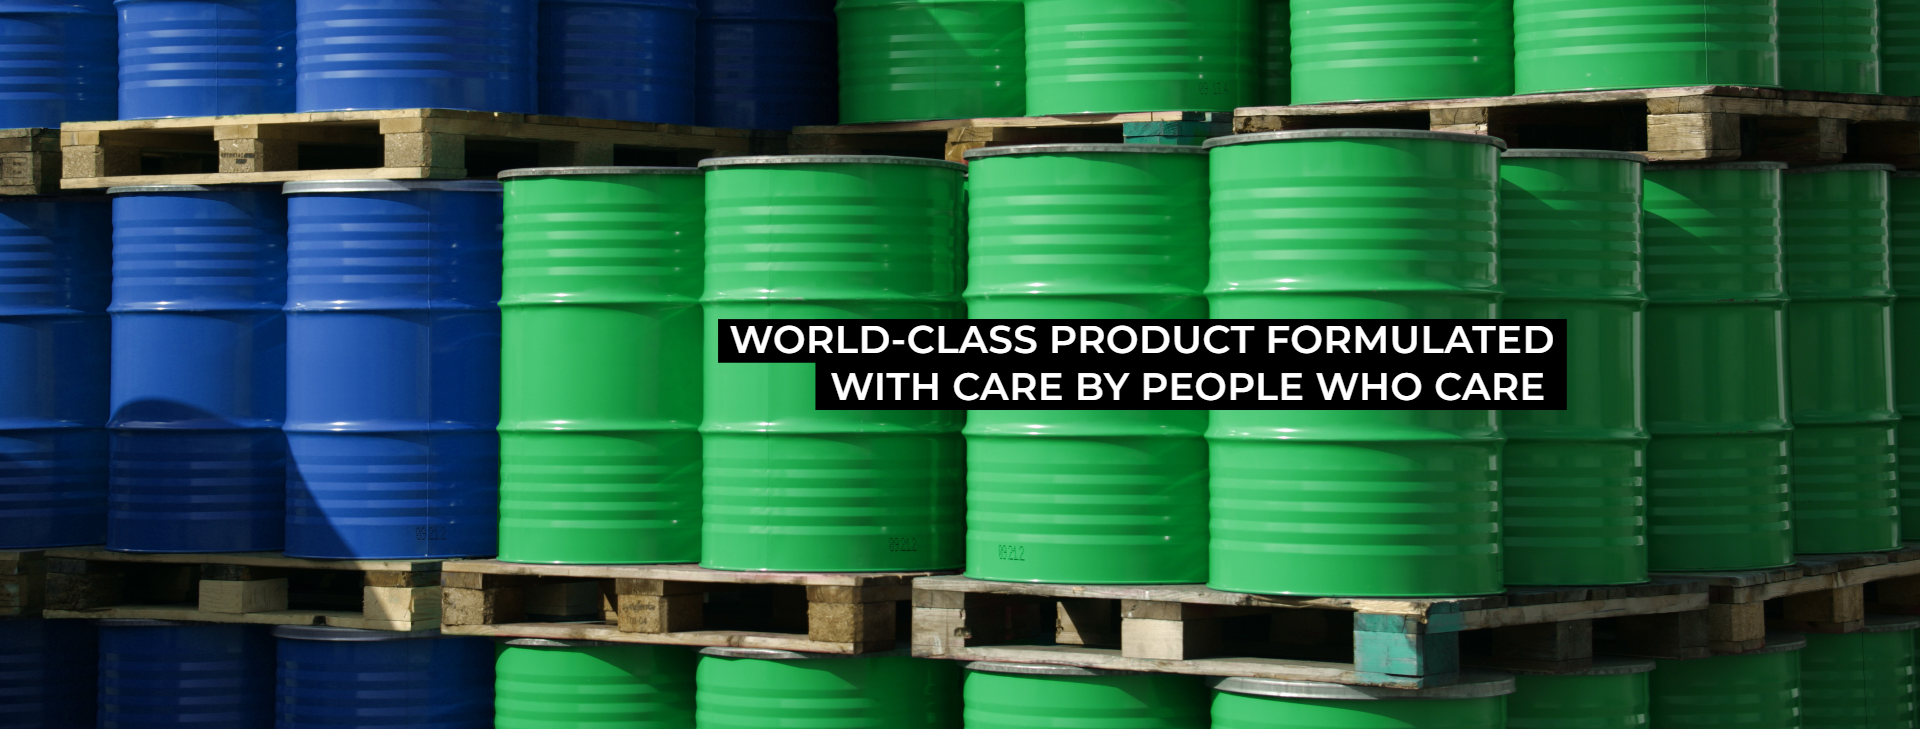 World-class products made with care by people who care